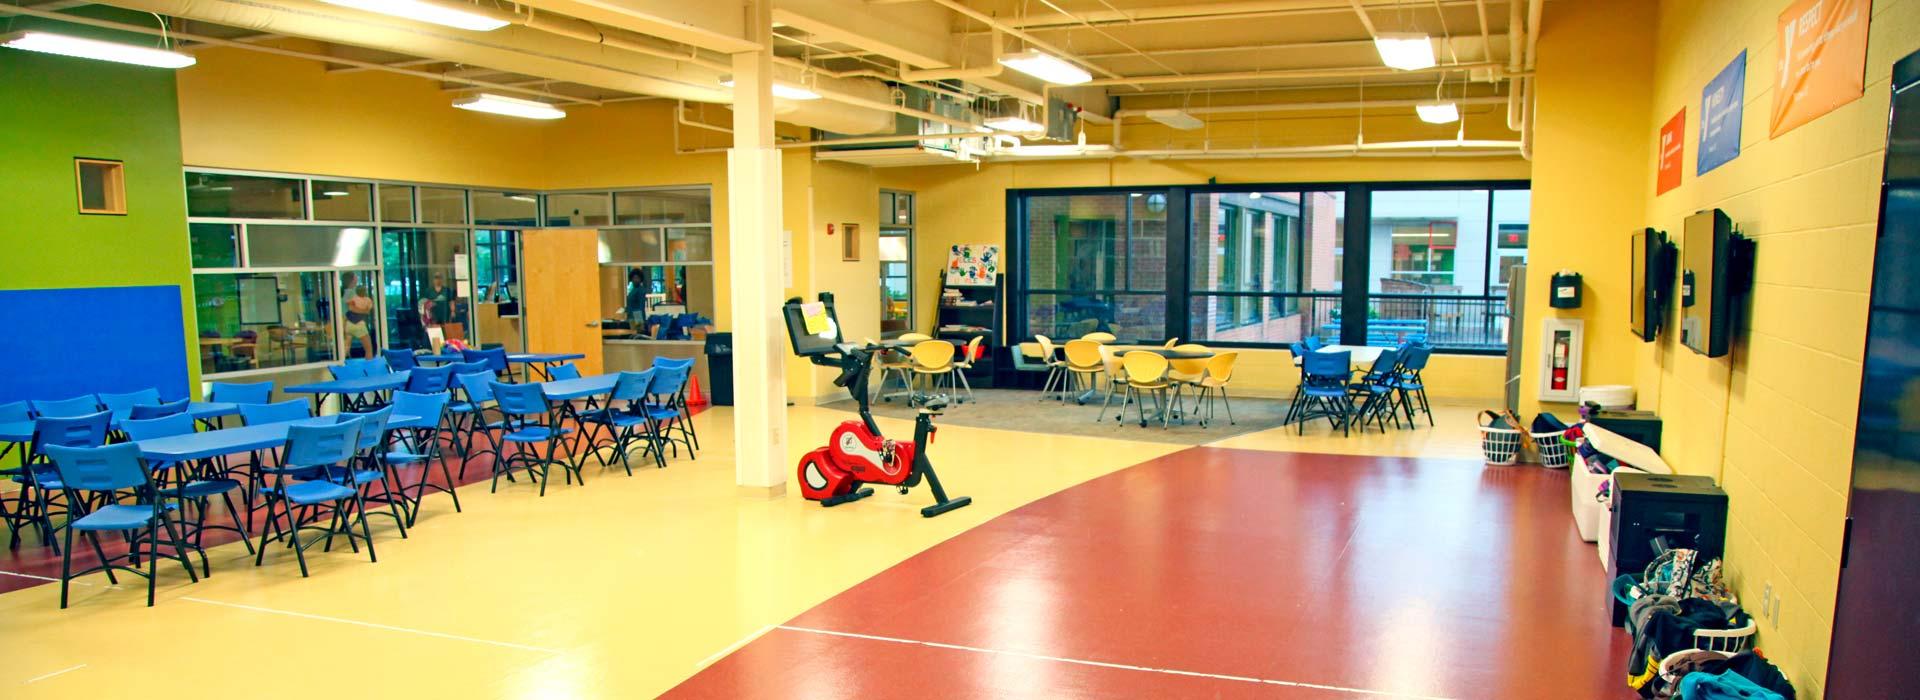 Interactive Zone with active play spaces and active video games at the YMCA on Granby